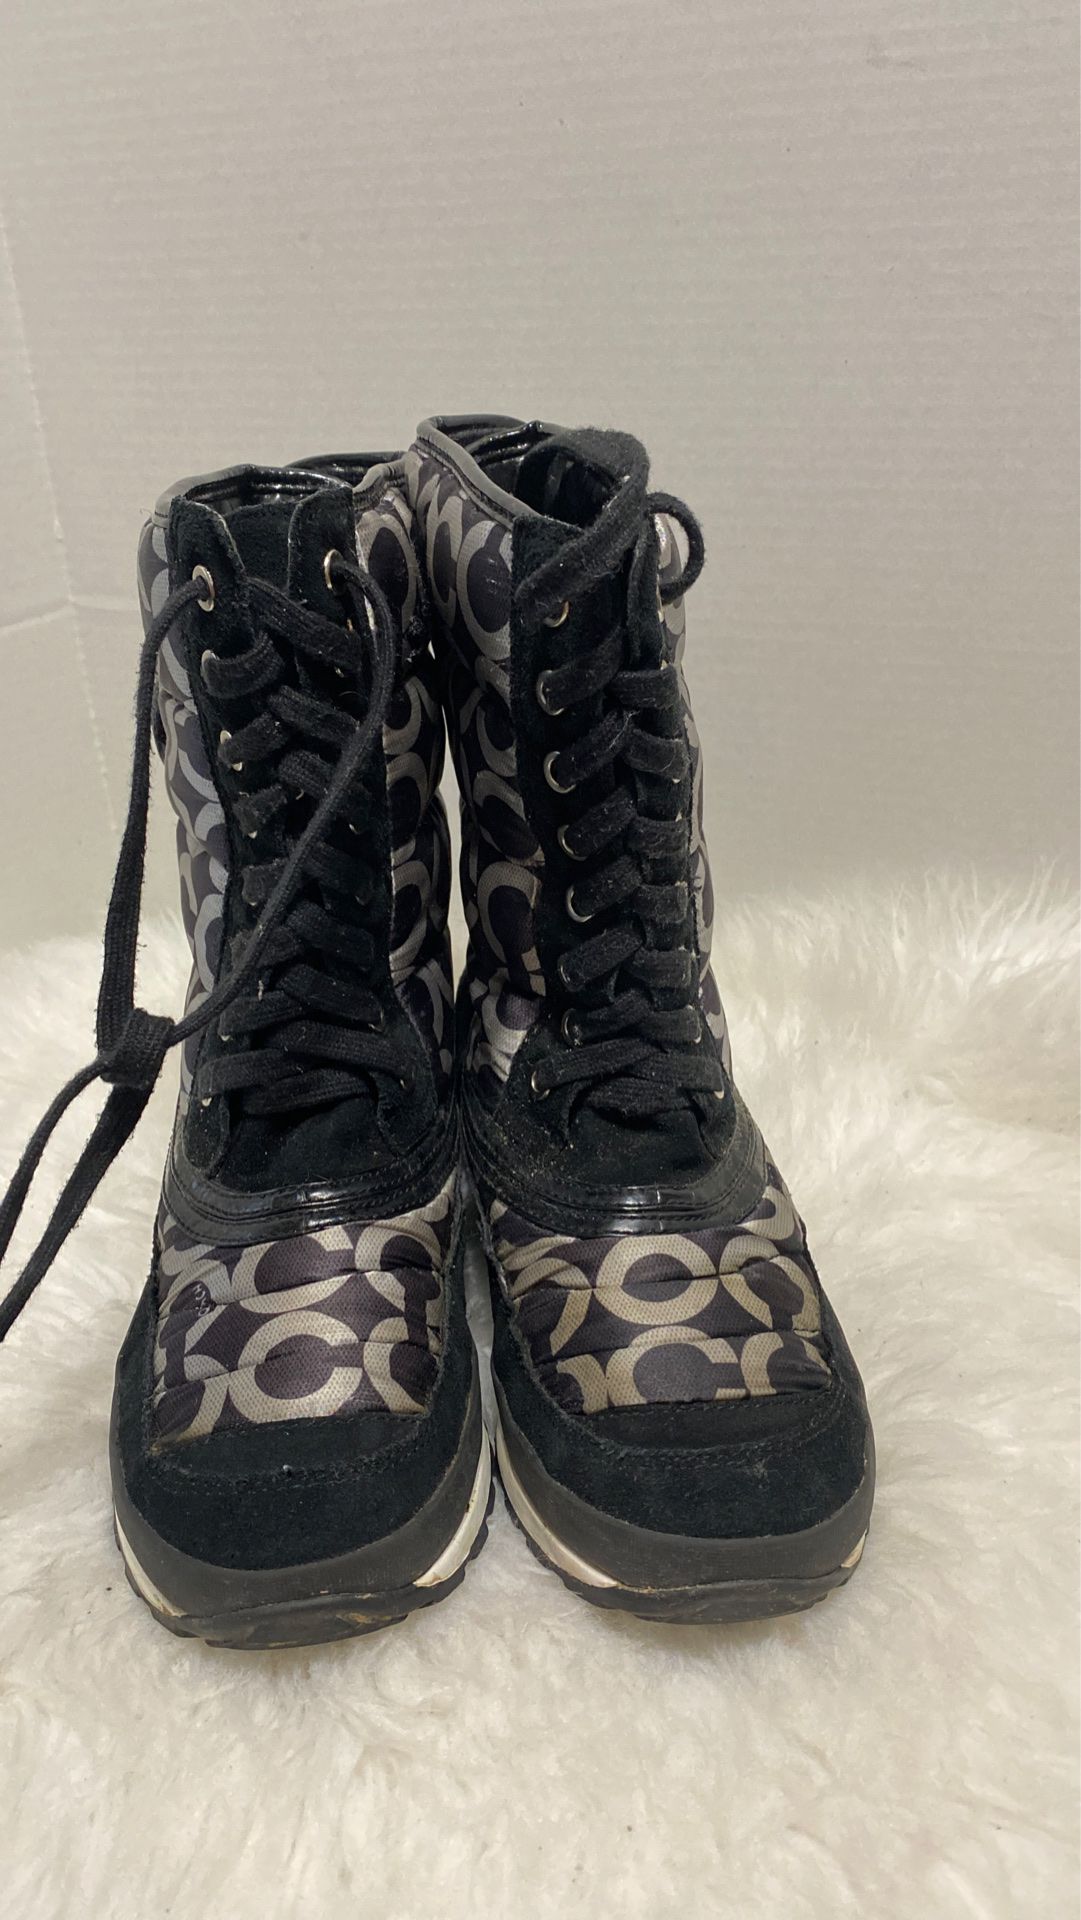 Coach Dorian F2370 quilted boots -size 8.5